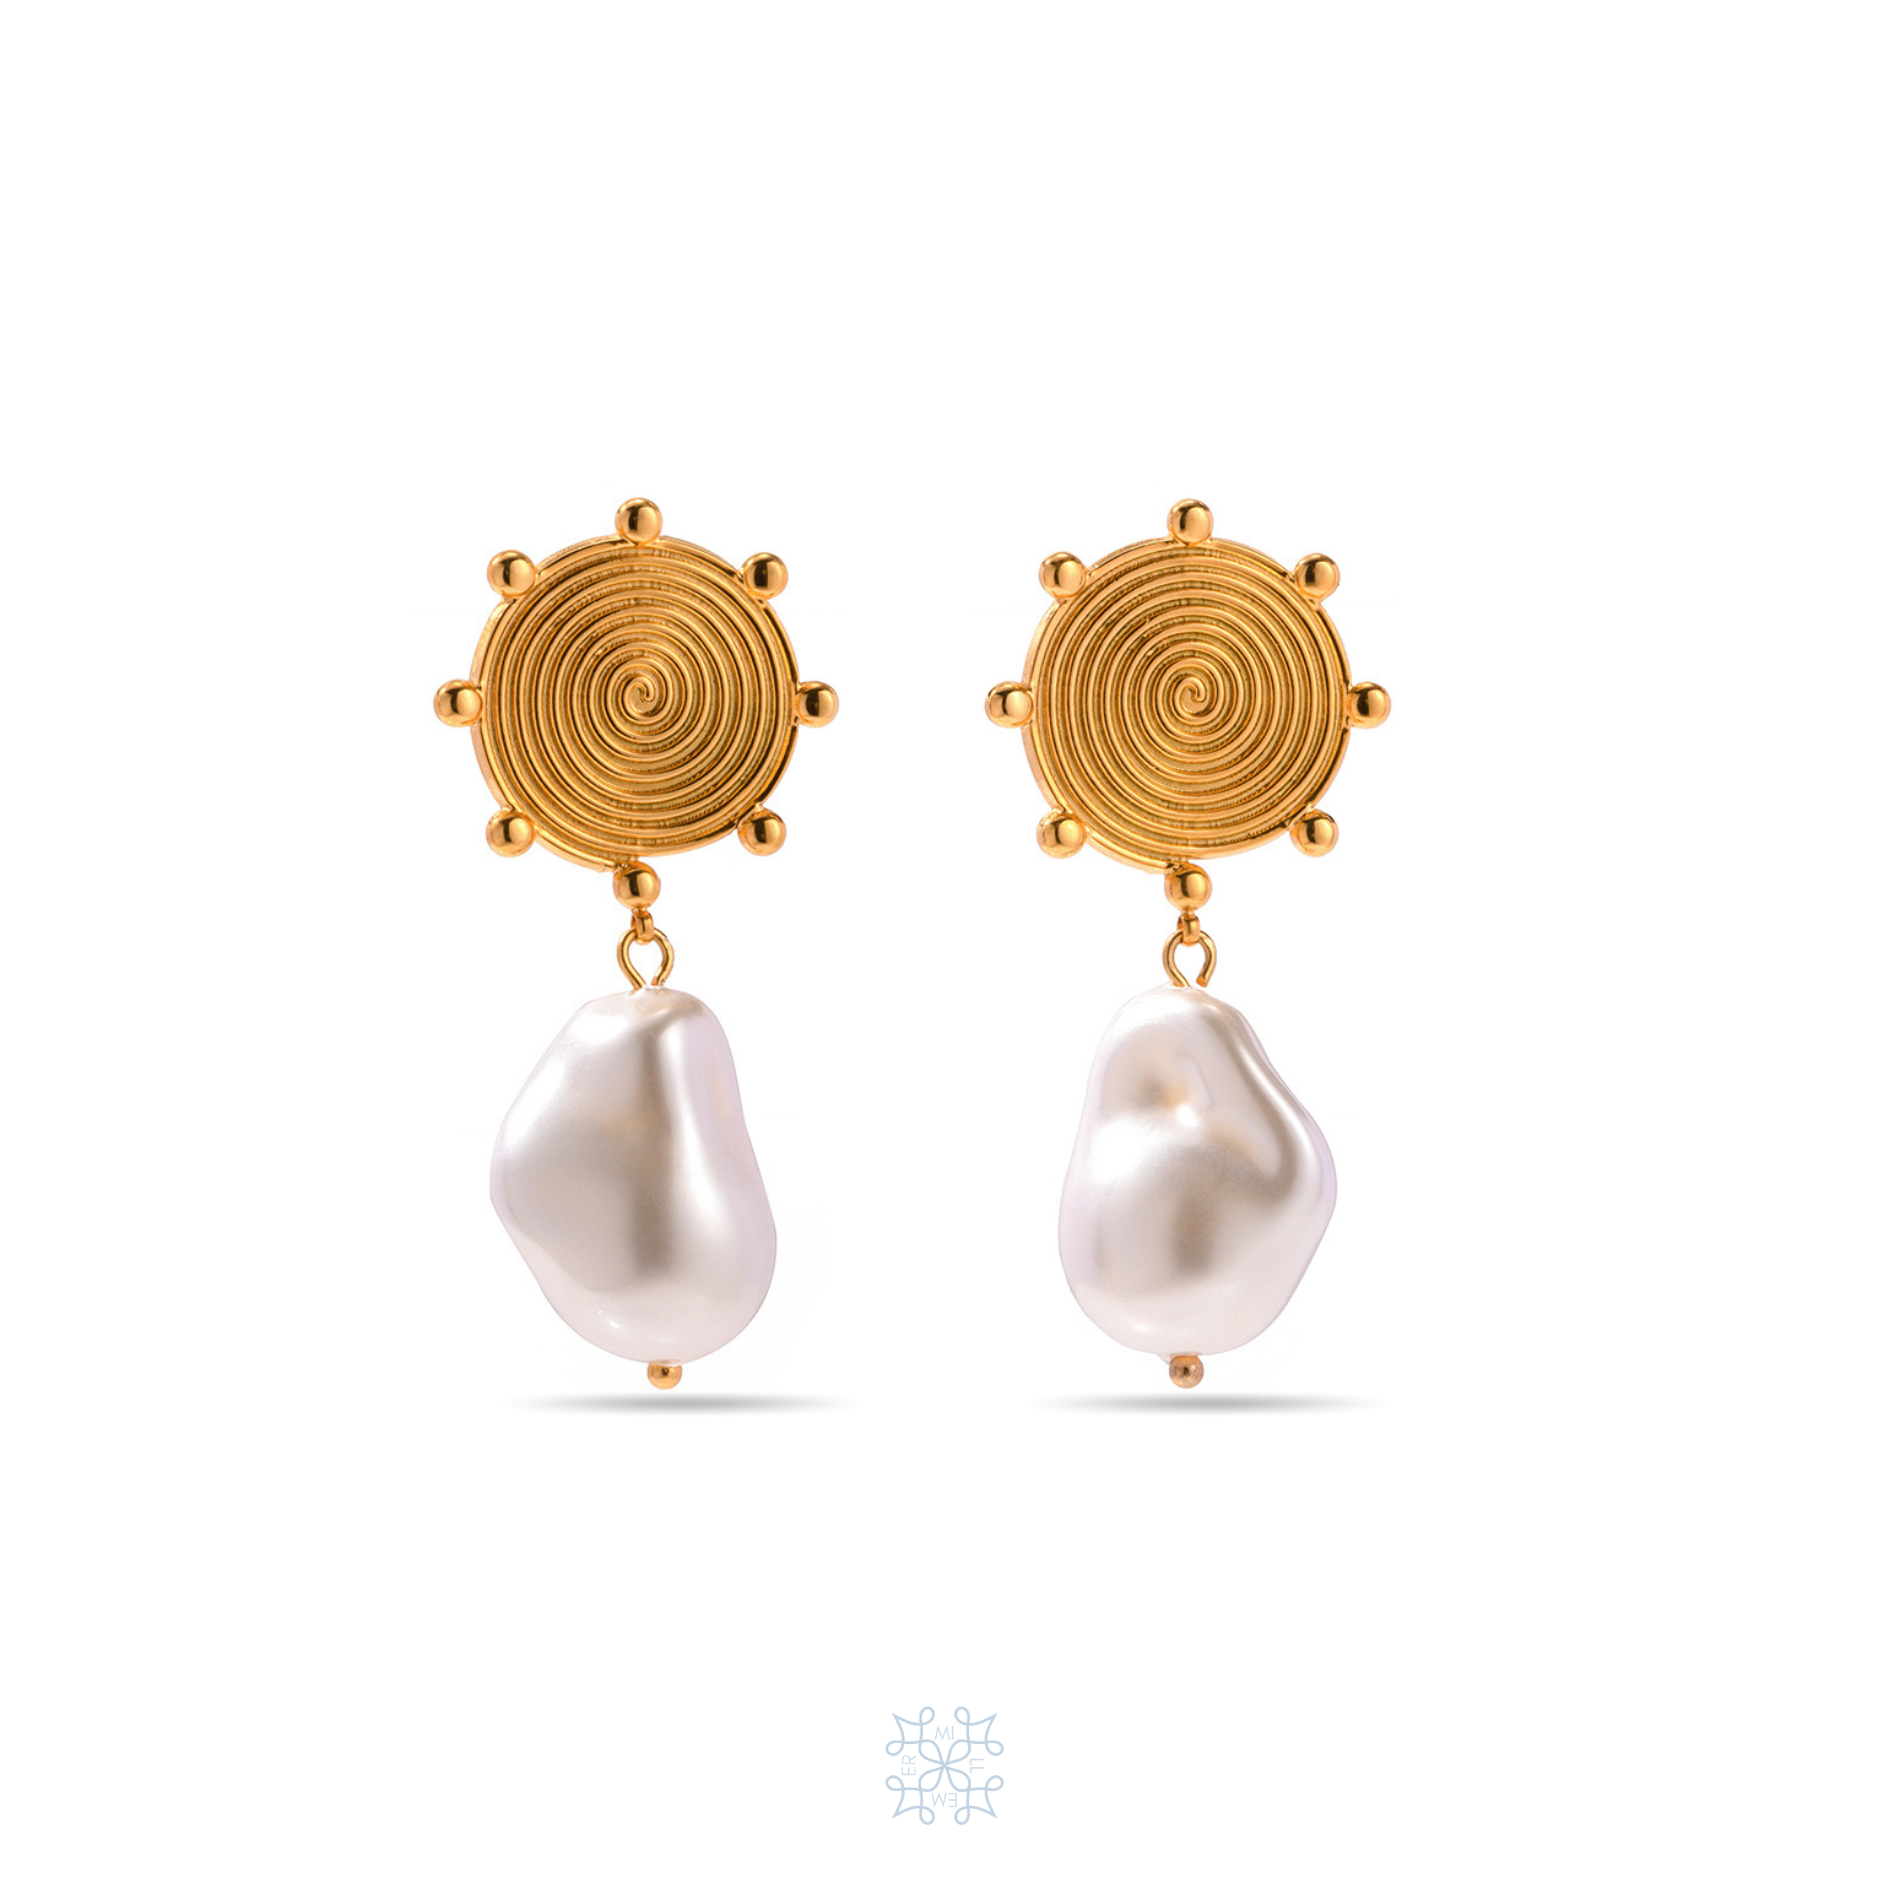 NEST Pearl Gold Earrings. The top part of the earrings is a circle with spiral form engraved on it. In the frame of the circle are 8 decorating small sphere attached. An irregular form whit pearl drop at the bottom of the earring. 